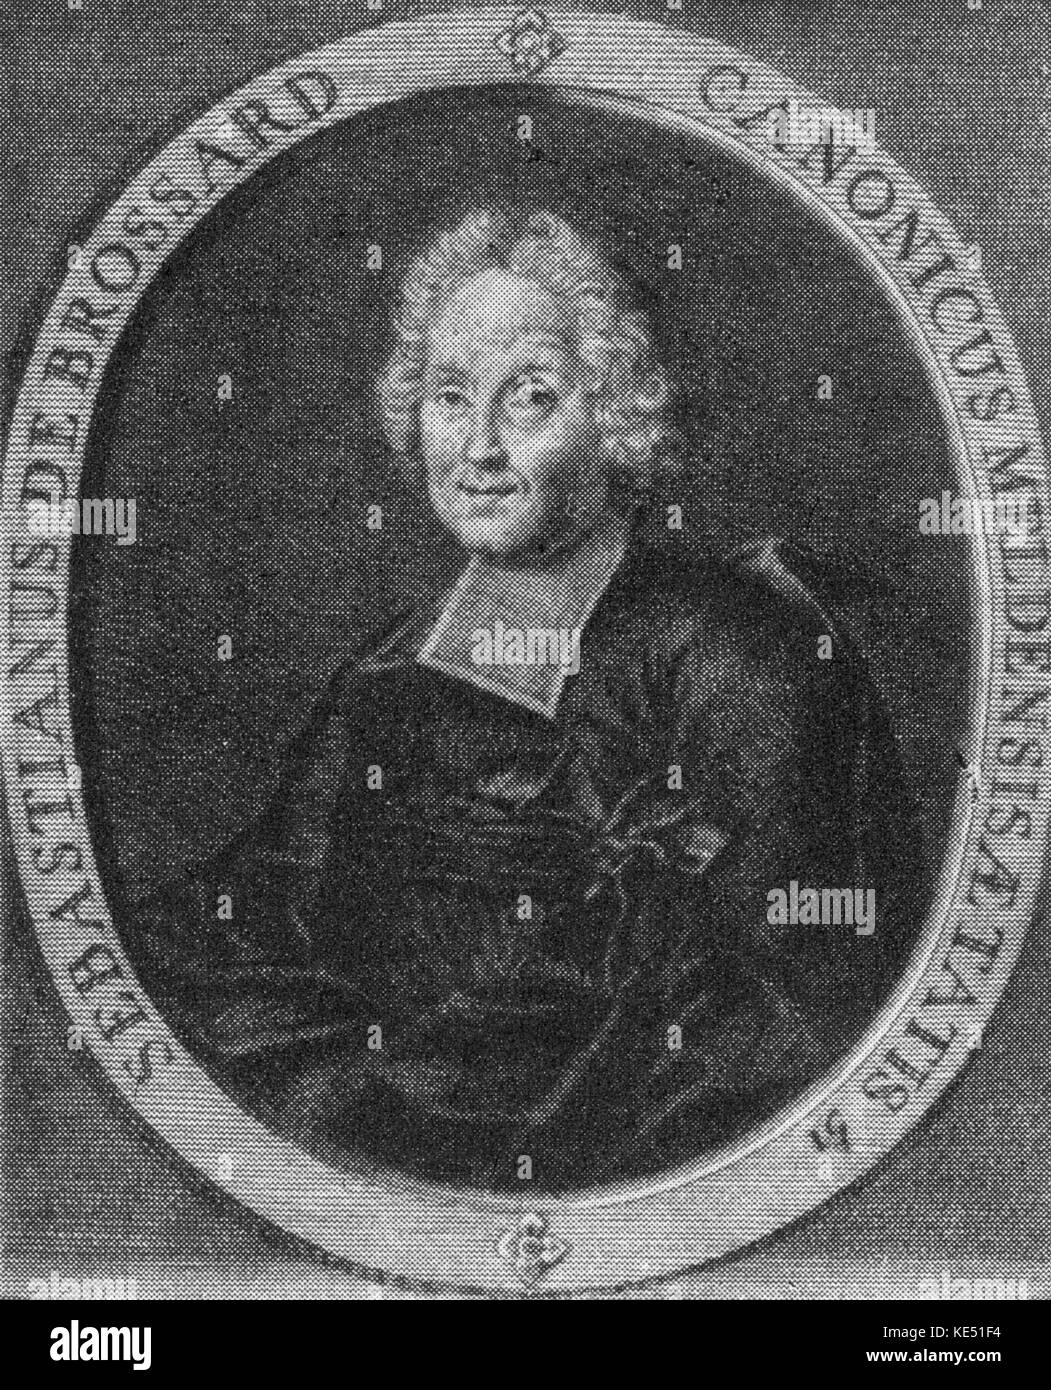 Sébastian de Brossard - portrait of the composer of church music. Also chaplain & cathedral choir-master at Meaux. Engraving by Landry, c. 1705. SdB: 1654-1730. Stock Photo